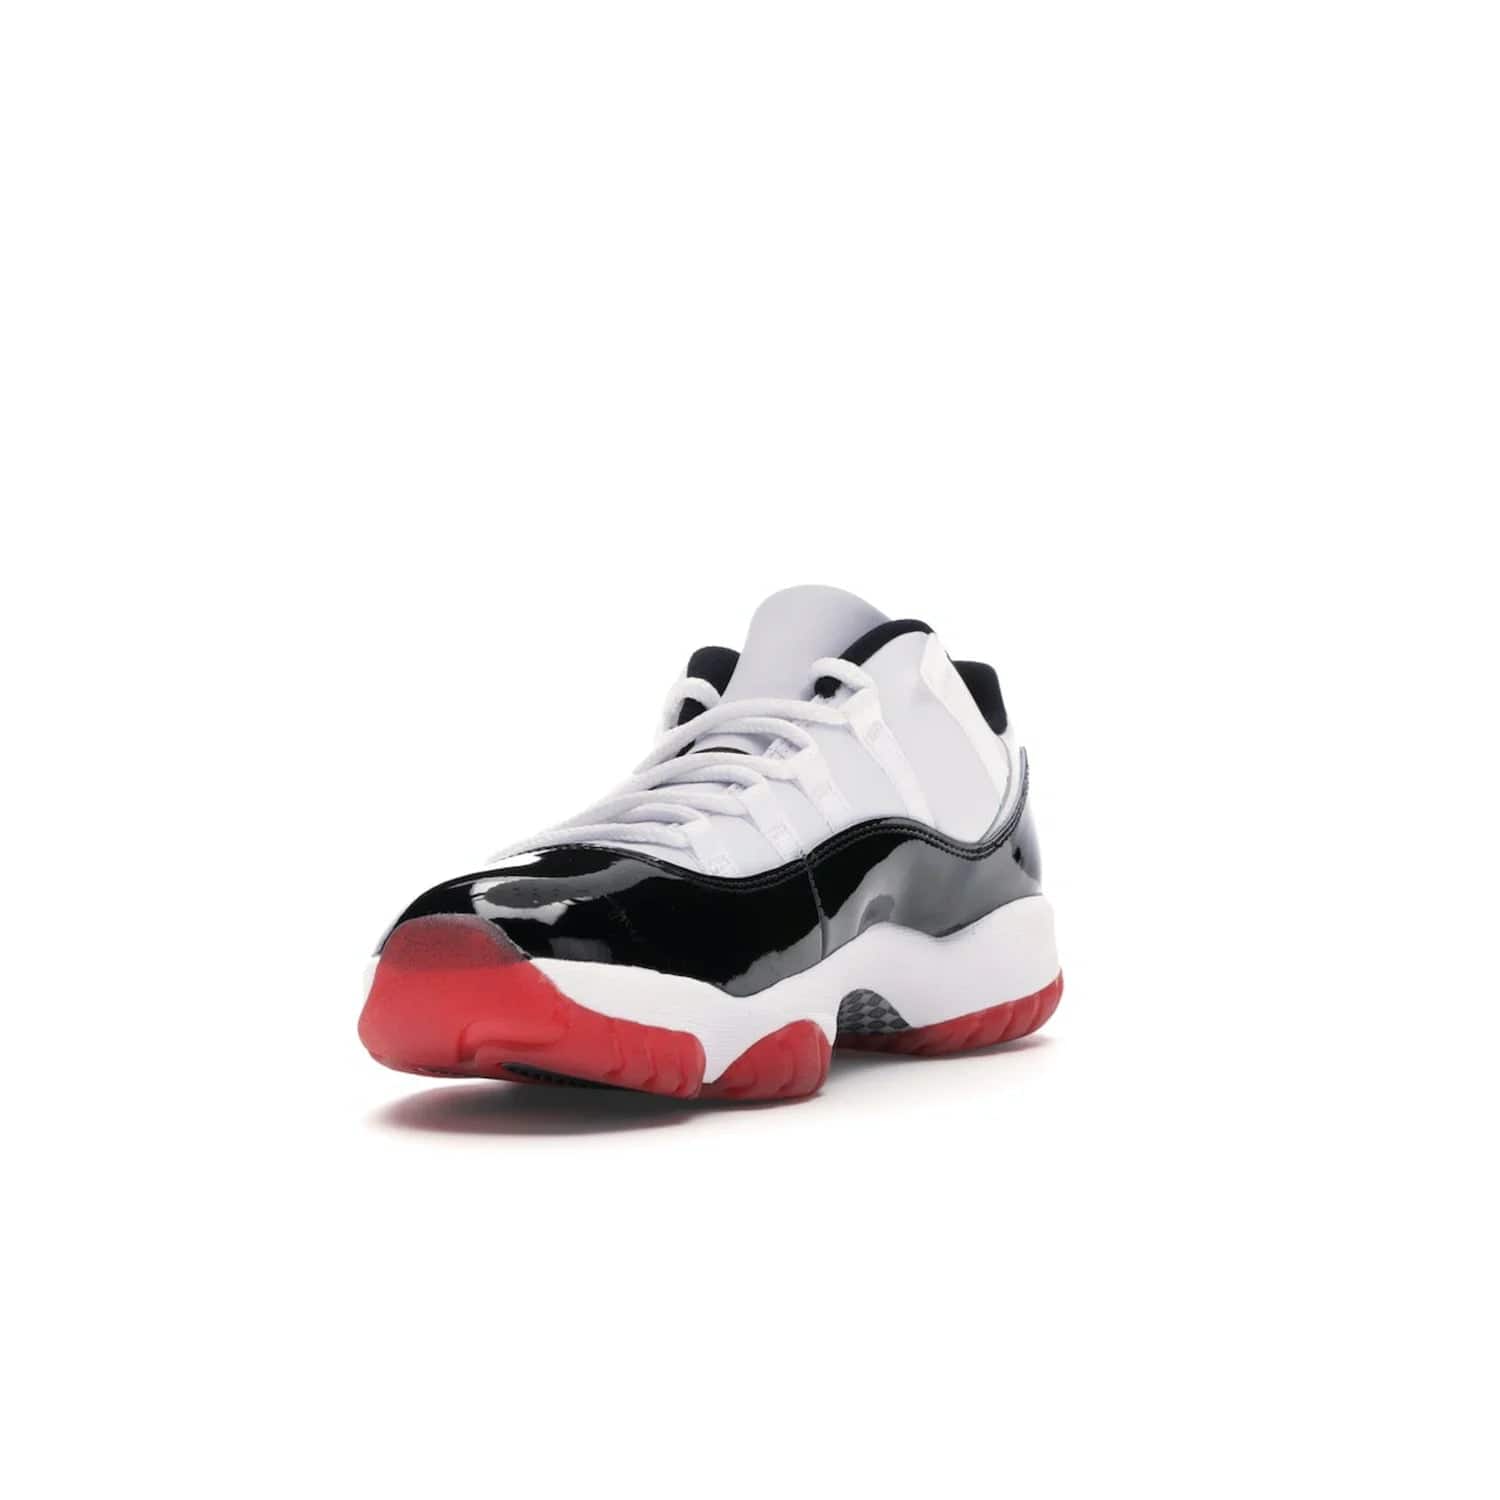 Jordan 11 Retro Low Concord Bred - Image 13 - Only at www.BallersClubKickz.com - Grab the classic Jordan 11 look with the Jordan 11 Retro Low Concord Bred. With white and black elements and the iconic red outsole of the Jordan 11 Bred, you won't miss a beat. Released in June 2020, the perfect complement to any outfit.